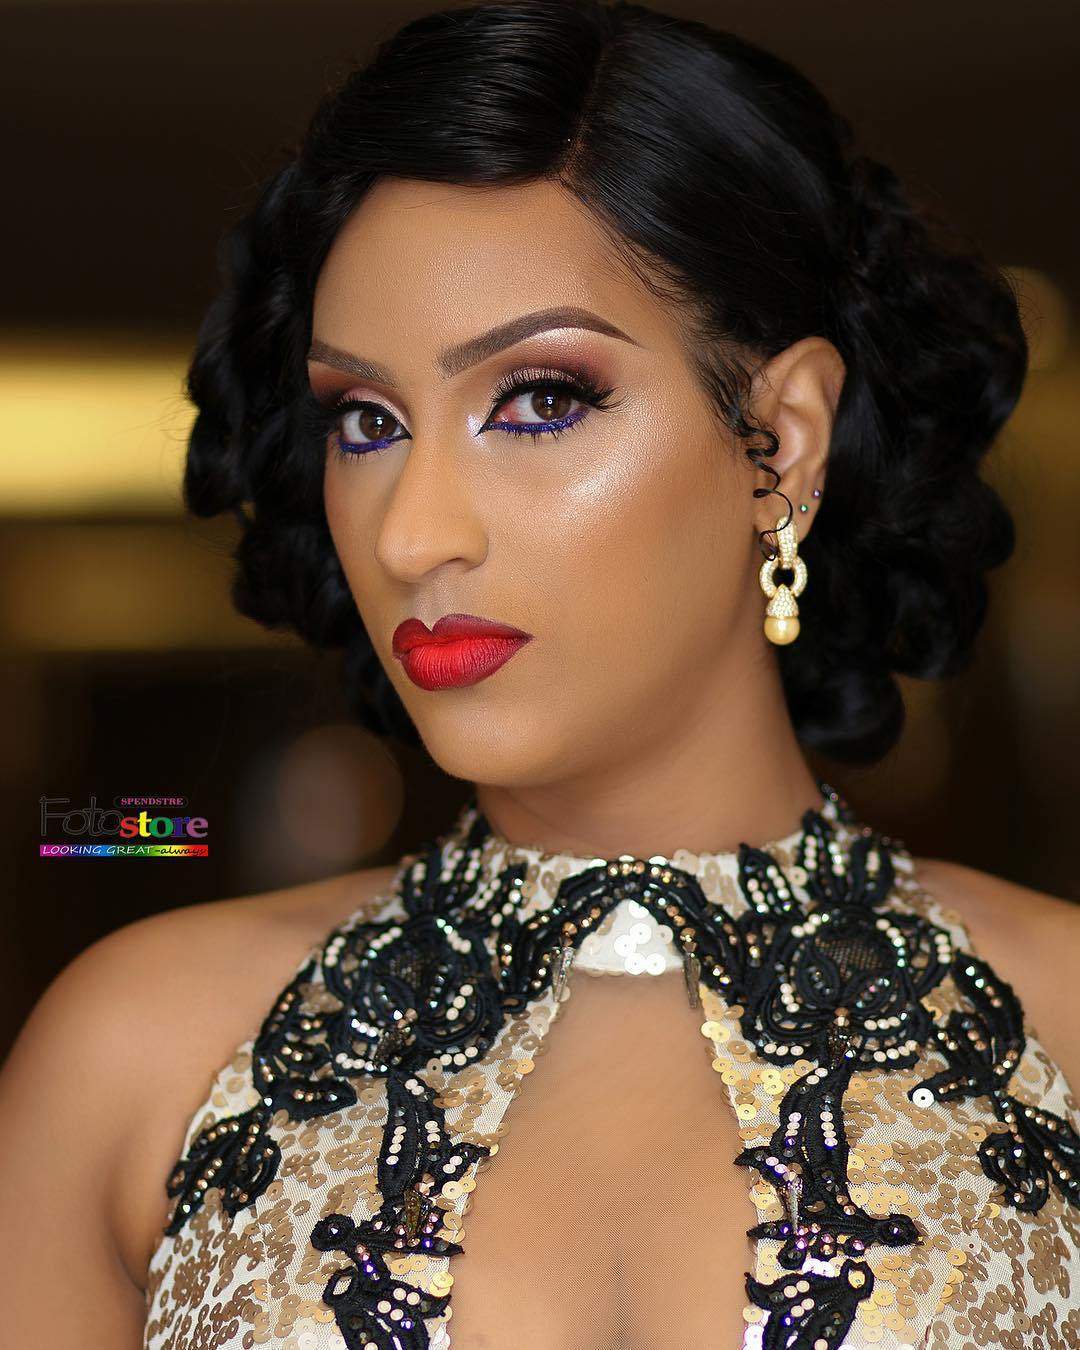 "I have been called "k legs" mocked and ridiculed" - Juliet Ibrahim